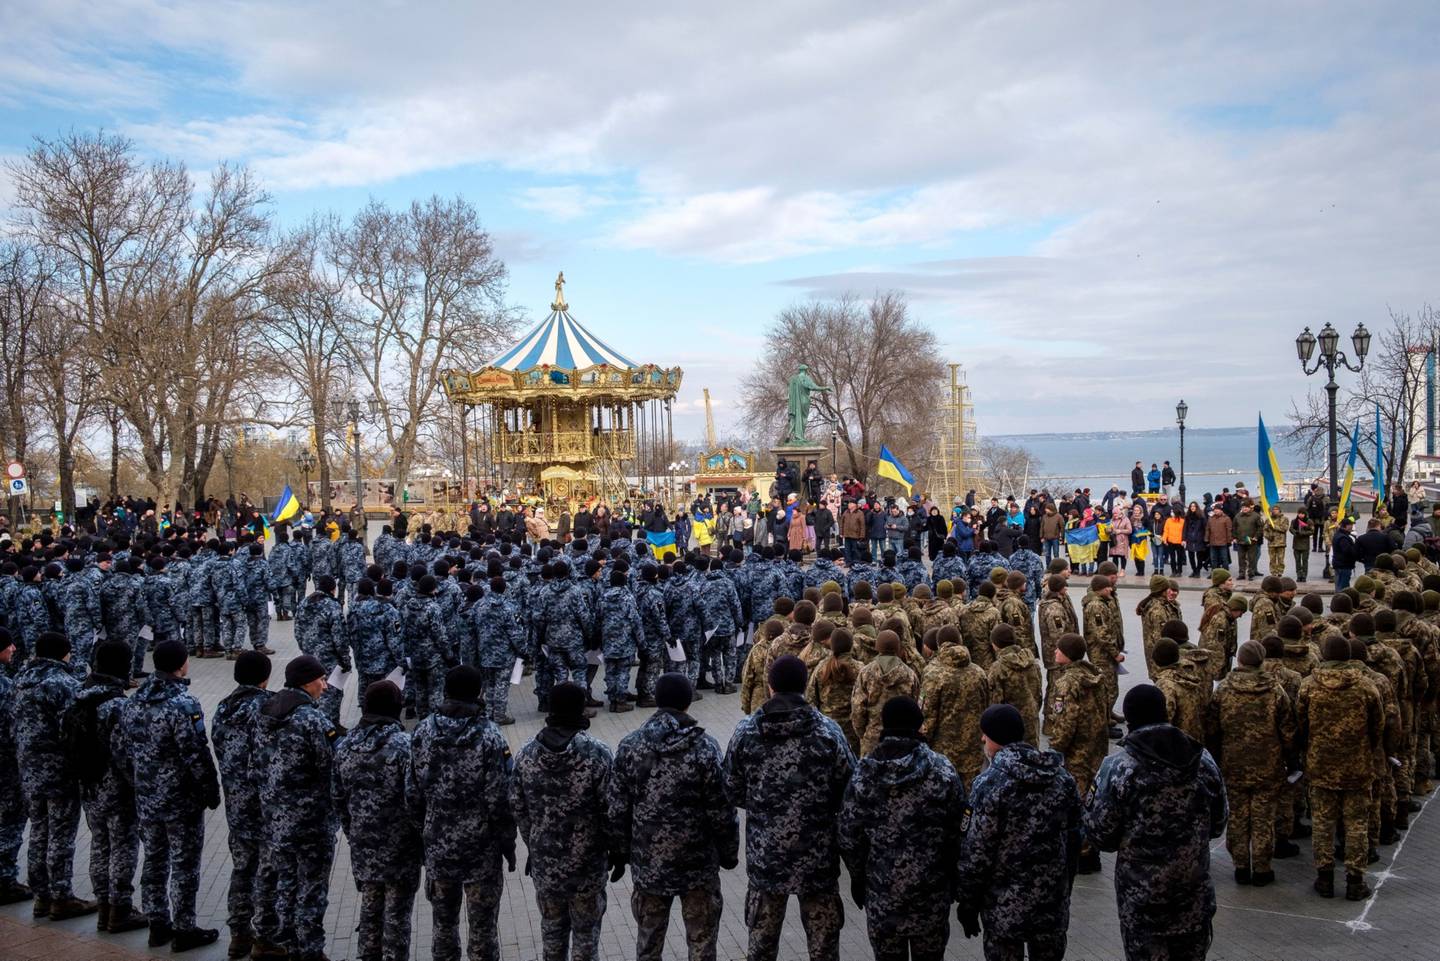 Police officers and Ukrainian soldiers attend a rally in Odessa. The port city on the northwestern shore of the Black Sea has over 1 million people and is a short hop by sea from Crimea.dfd